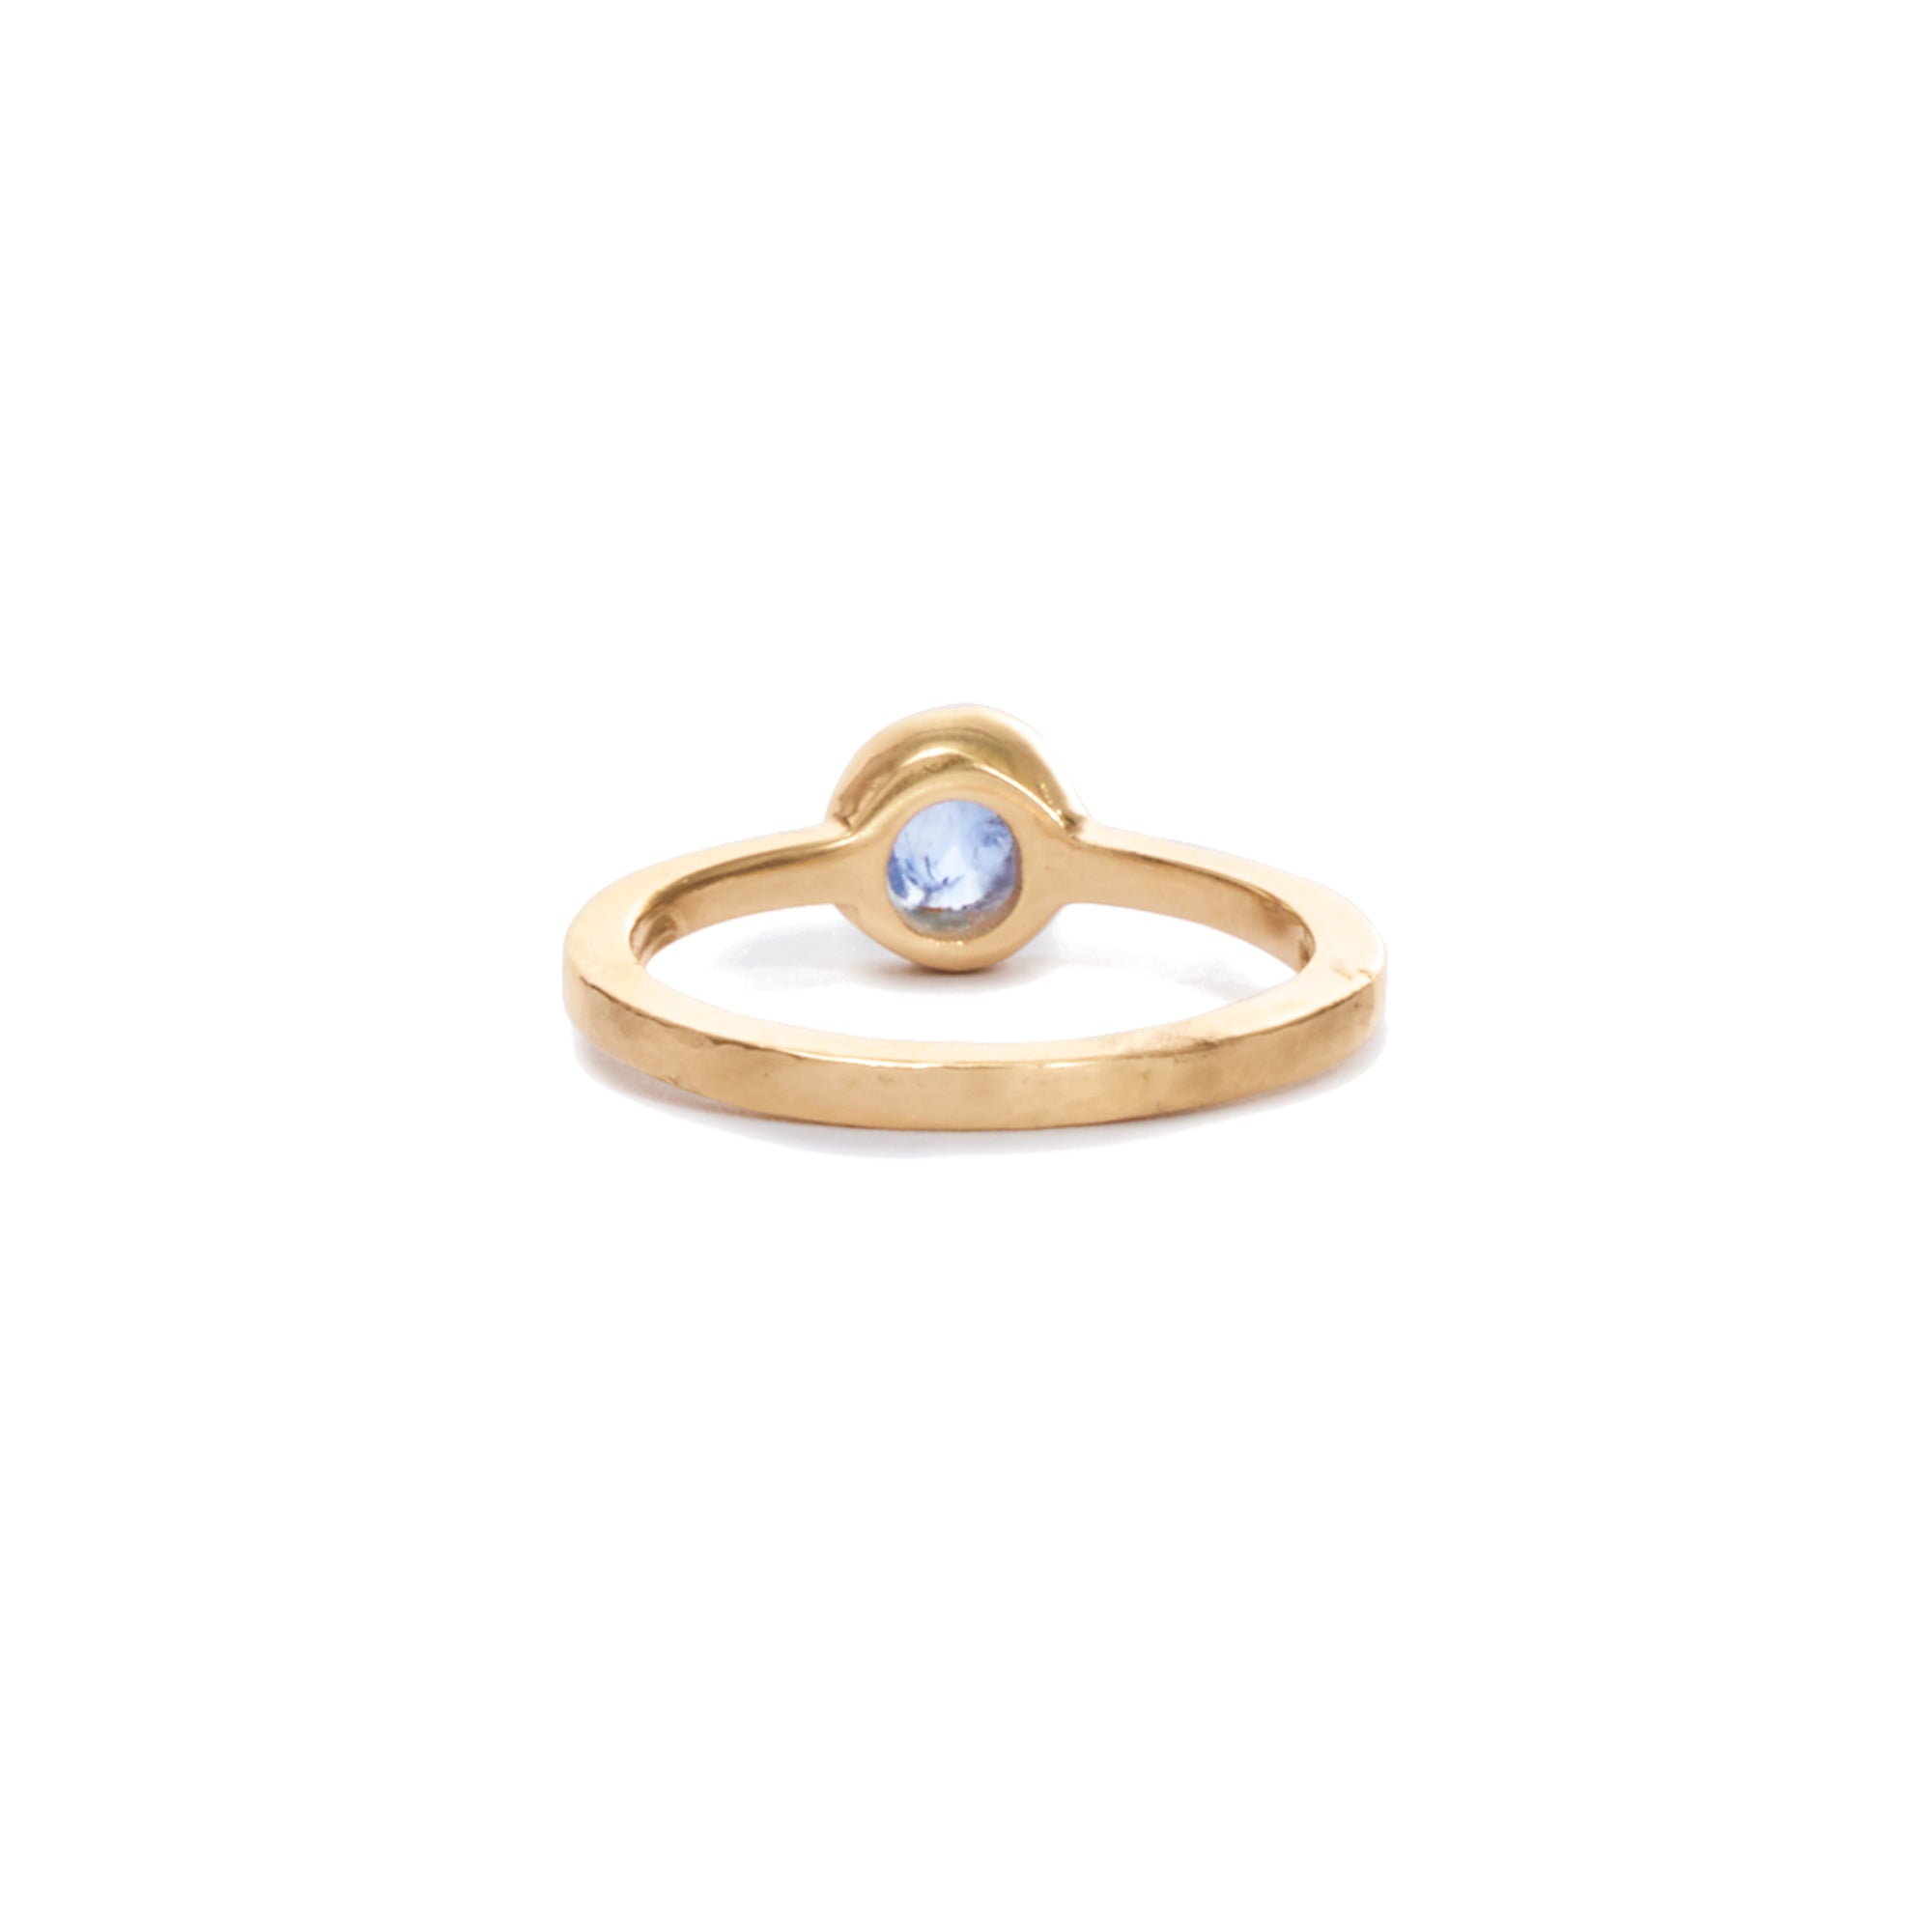 Our blue sapphire solitaire is a modern take on the classic favorite, featuring a round blue sapphire bezel set in 14k gold